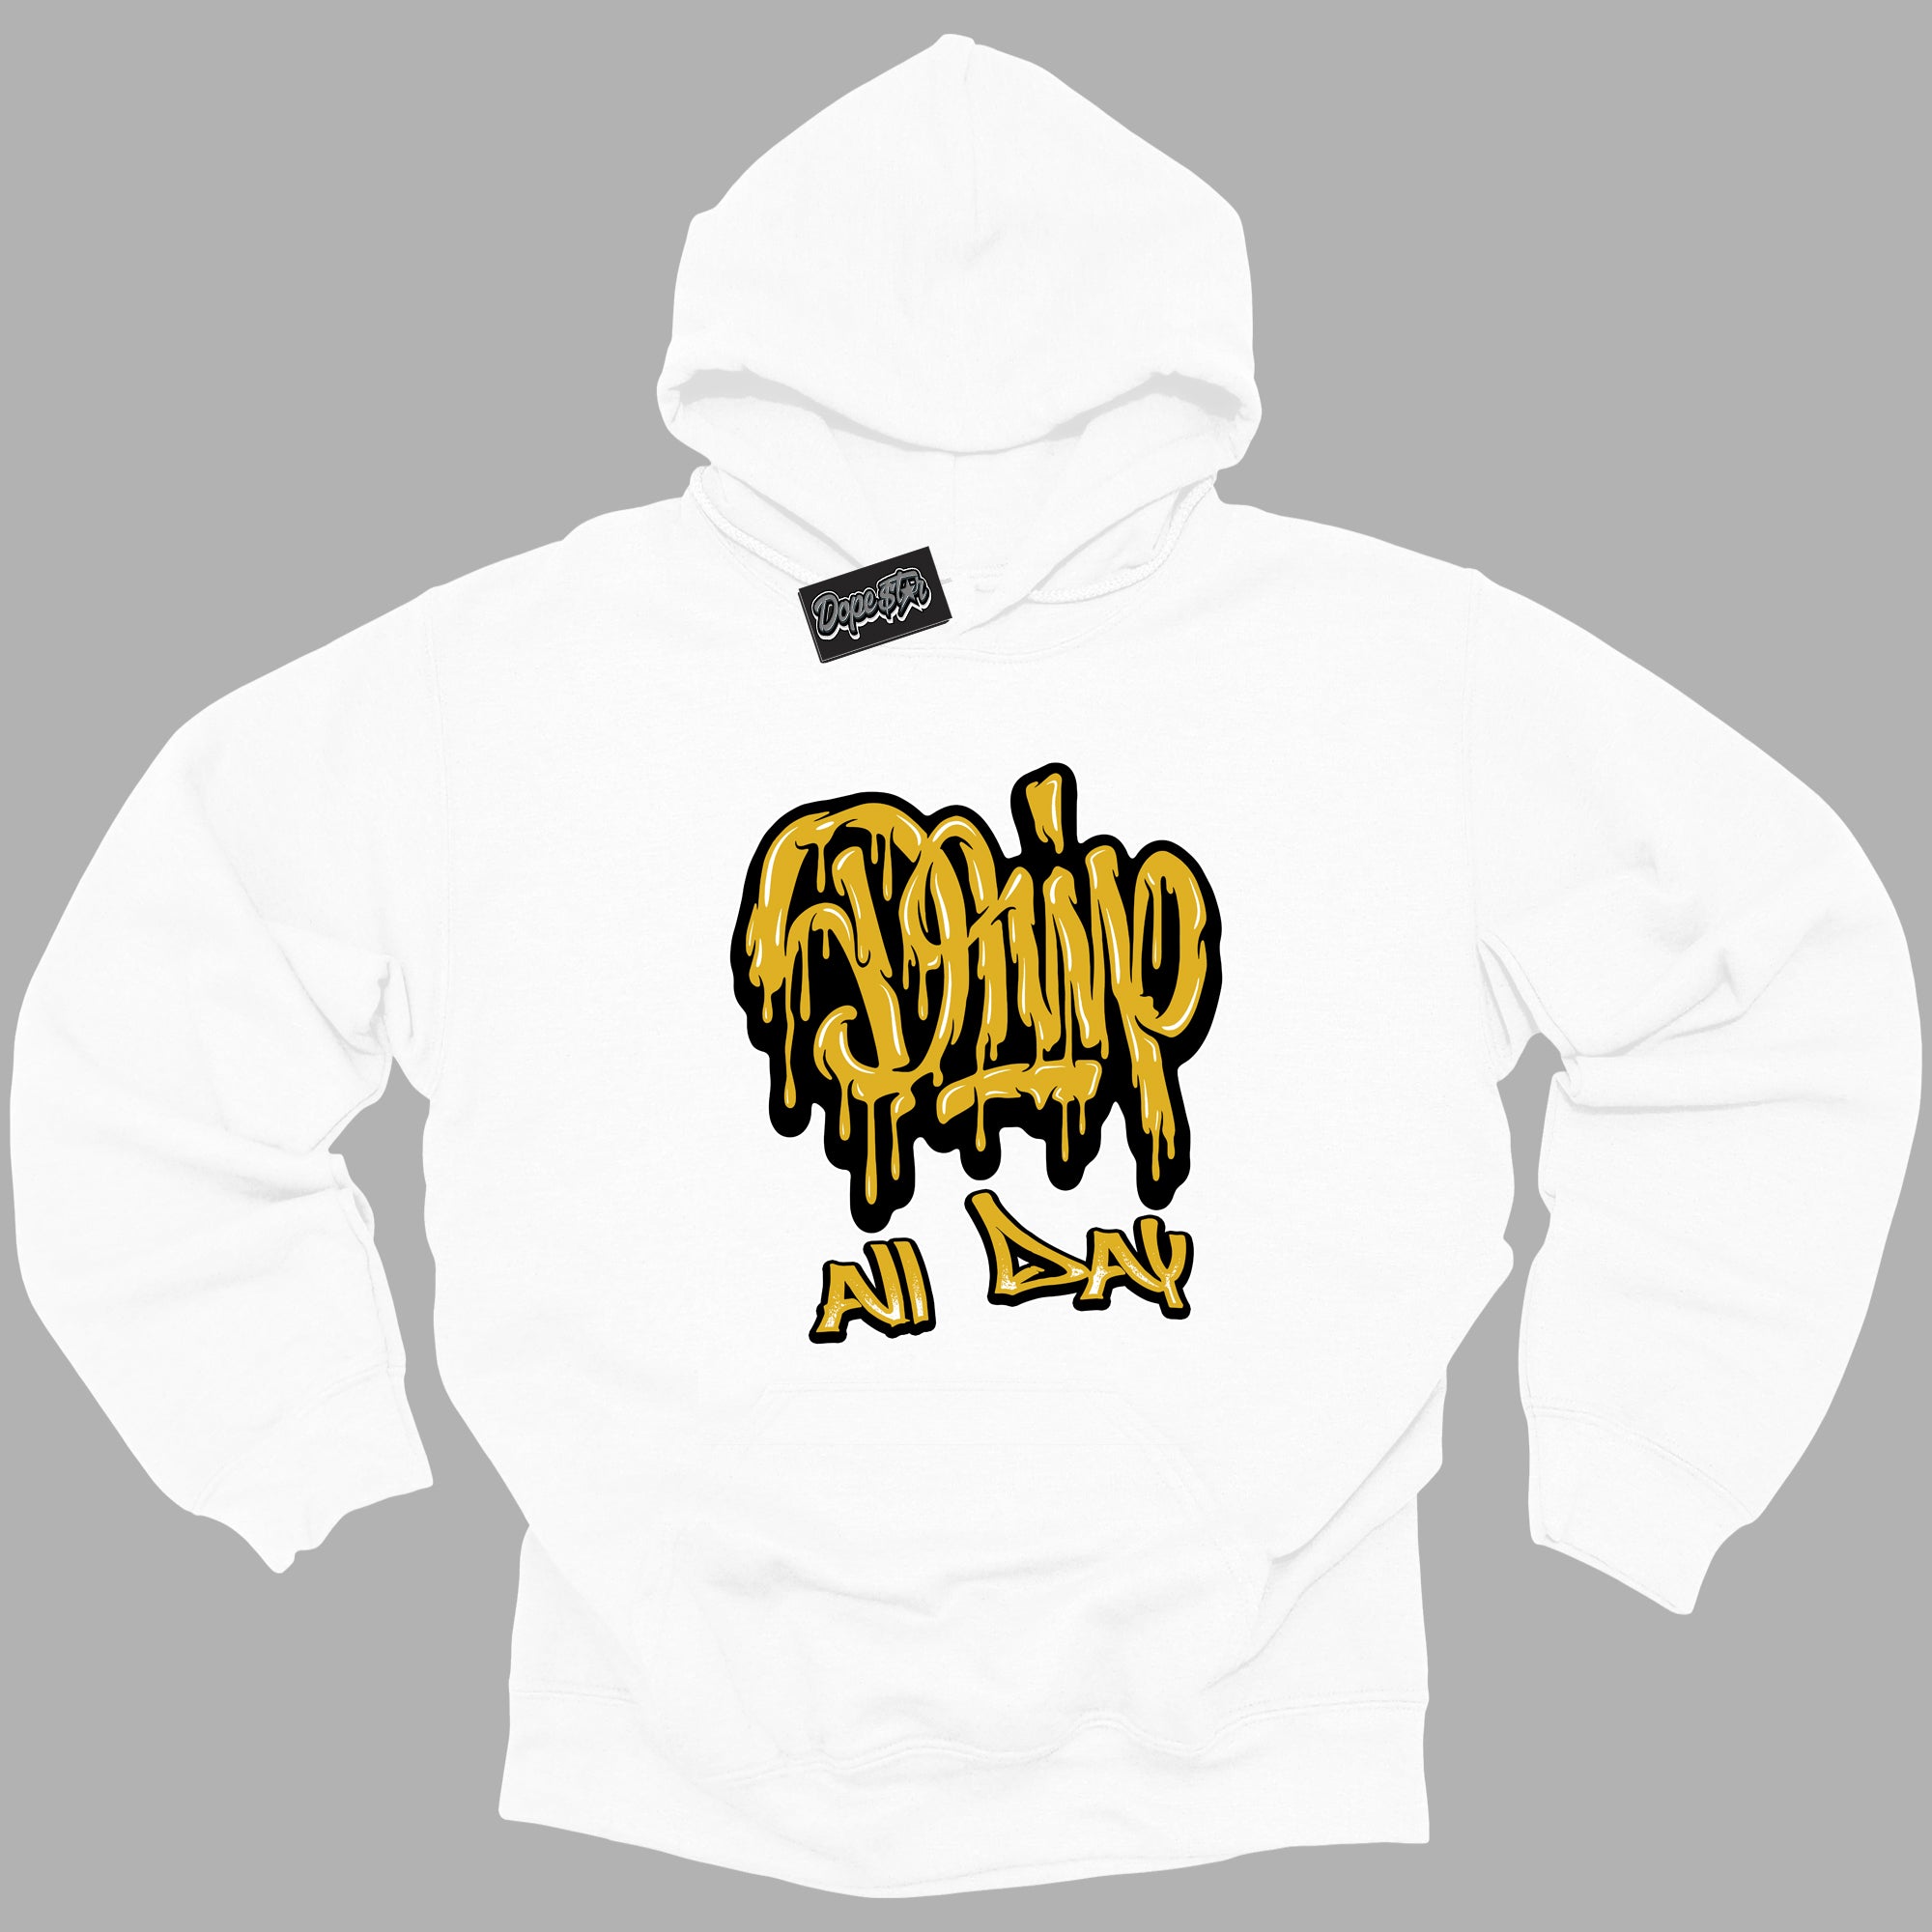 Cool White Hoodie with “ Drip All Day ”  design that Perfectly Matches Yellow Ochre 6s Sneakers.